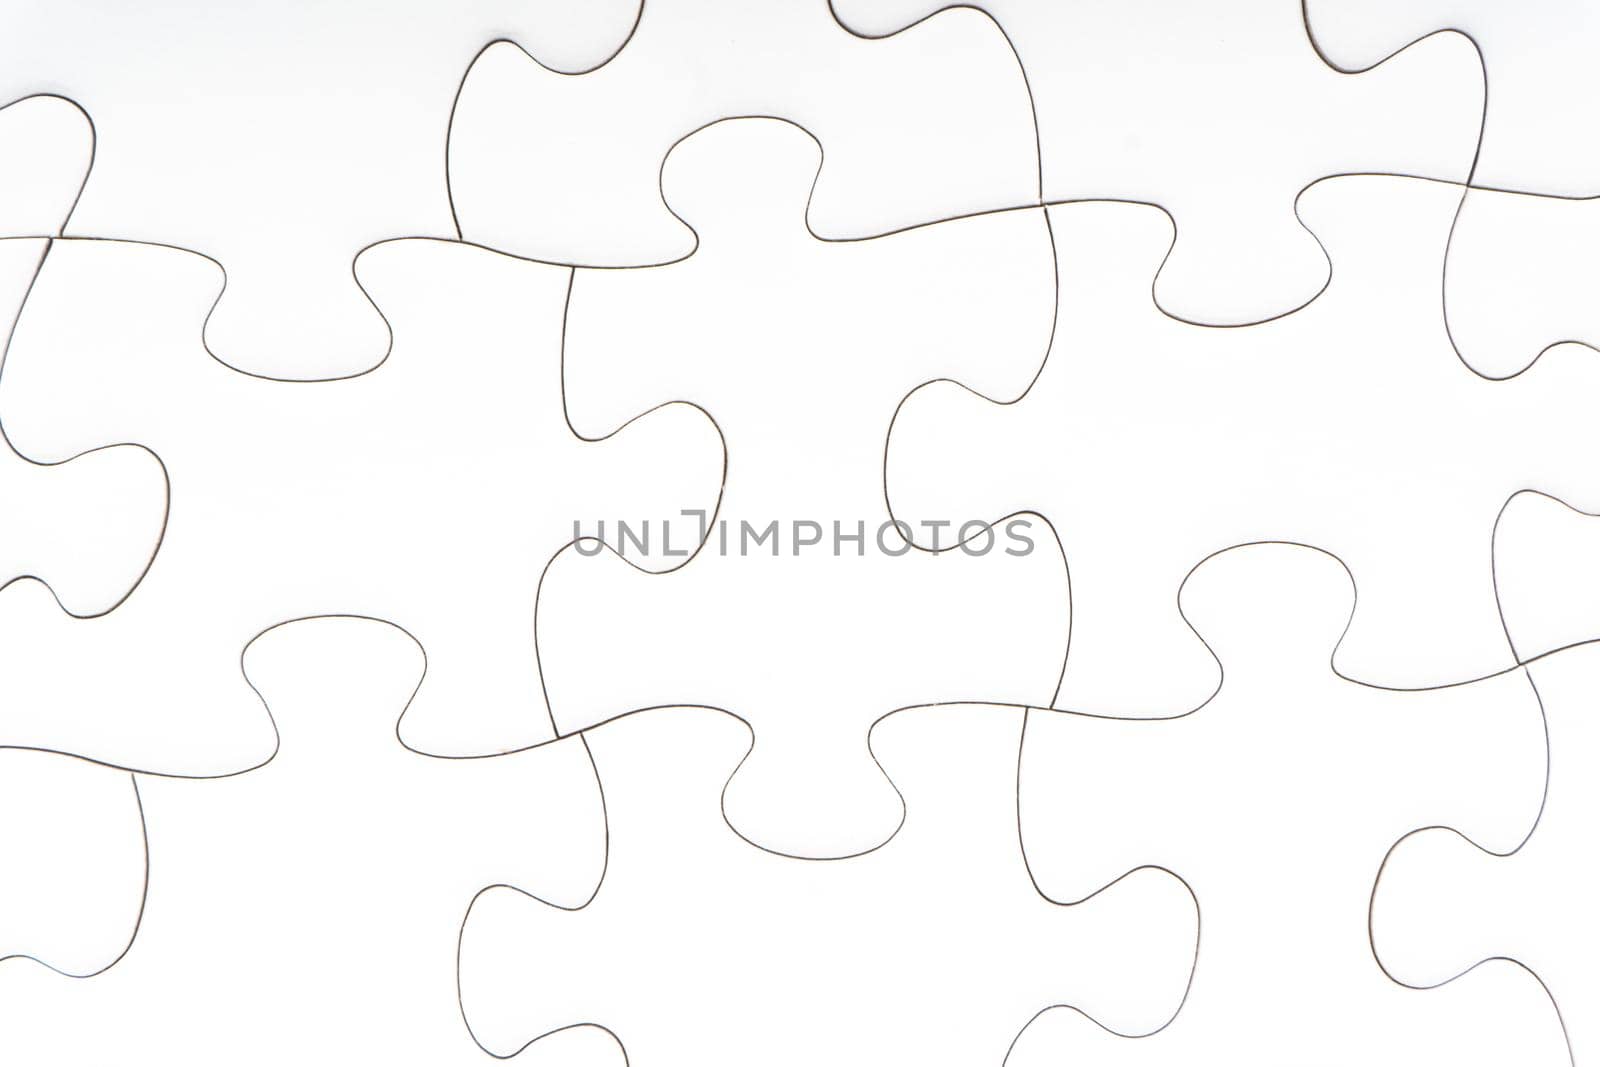 Jigsaw puzzle pieces background.  by silverwings